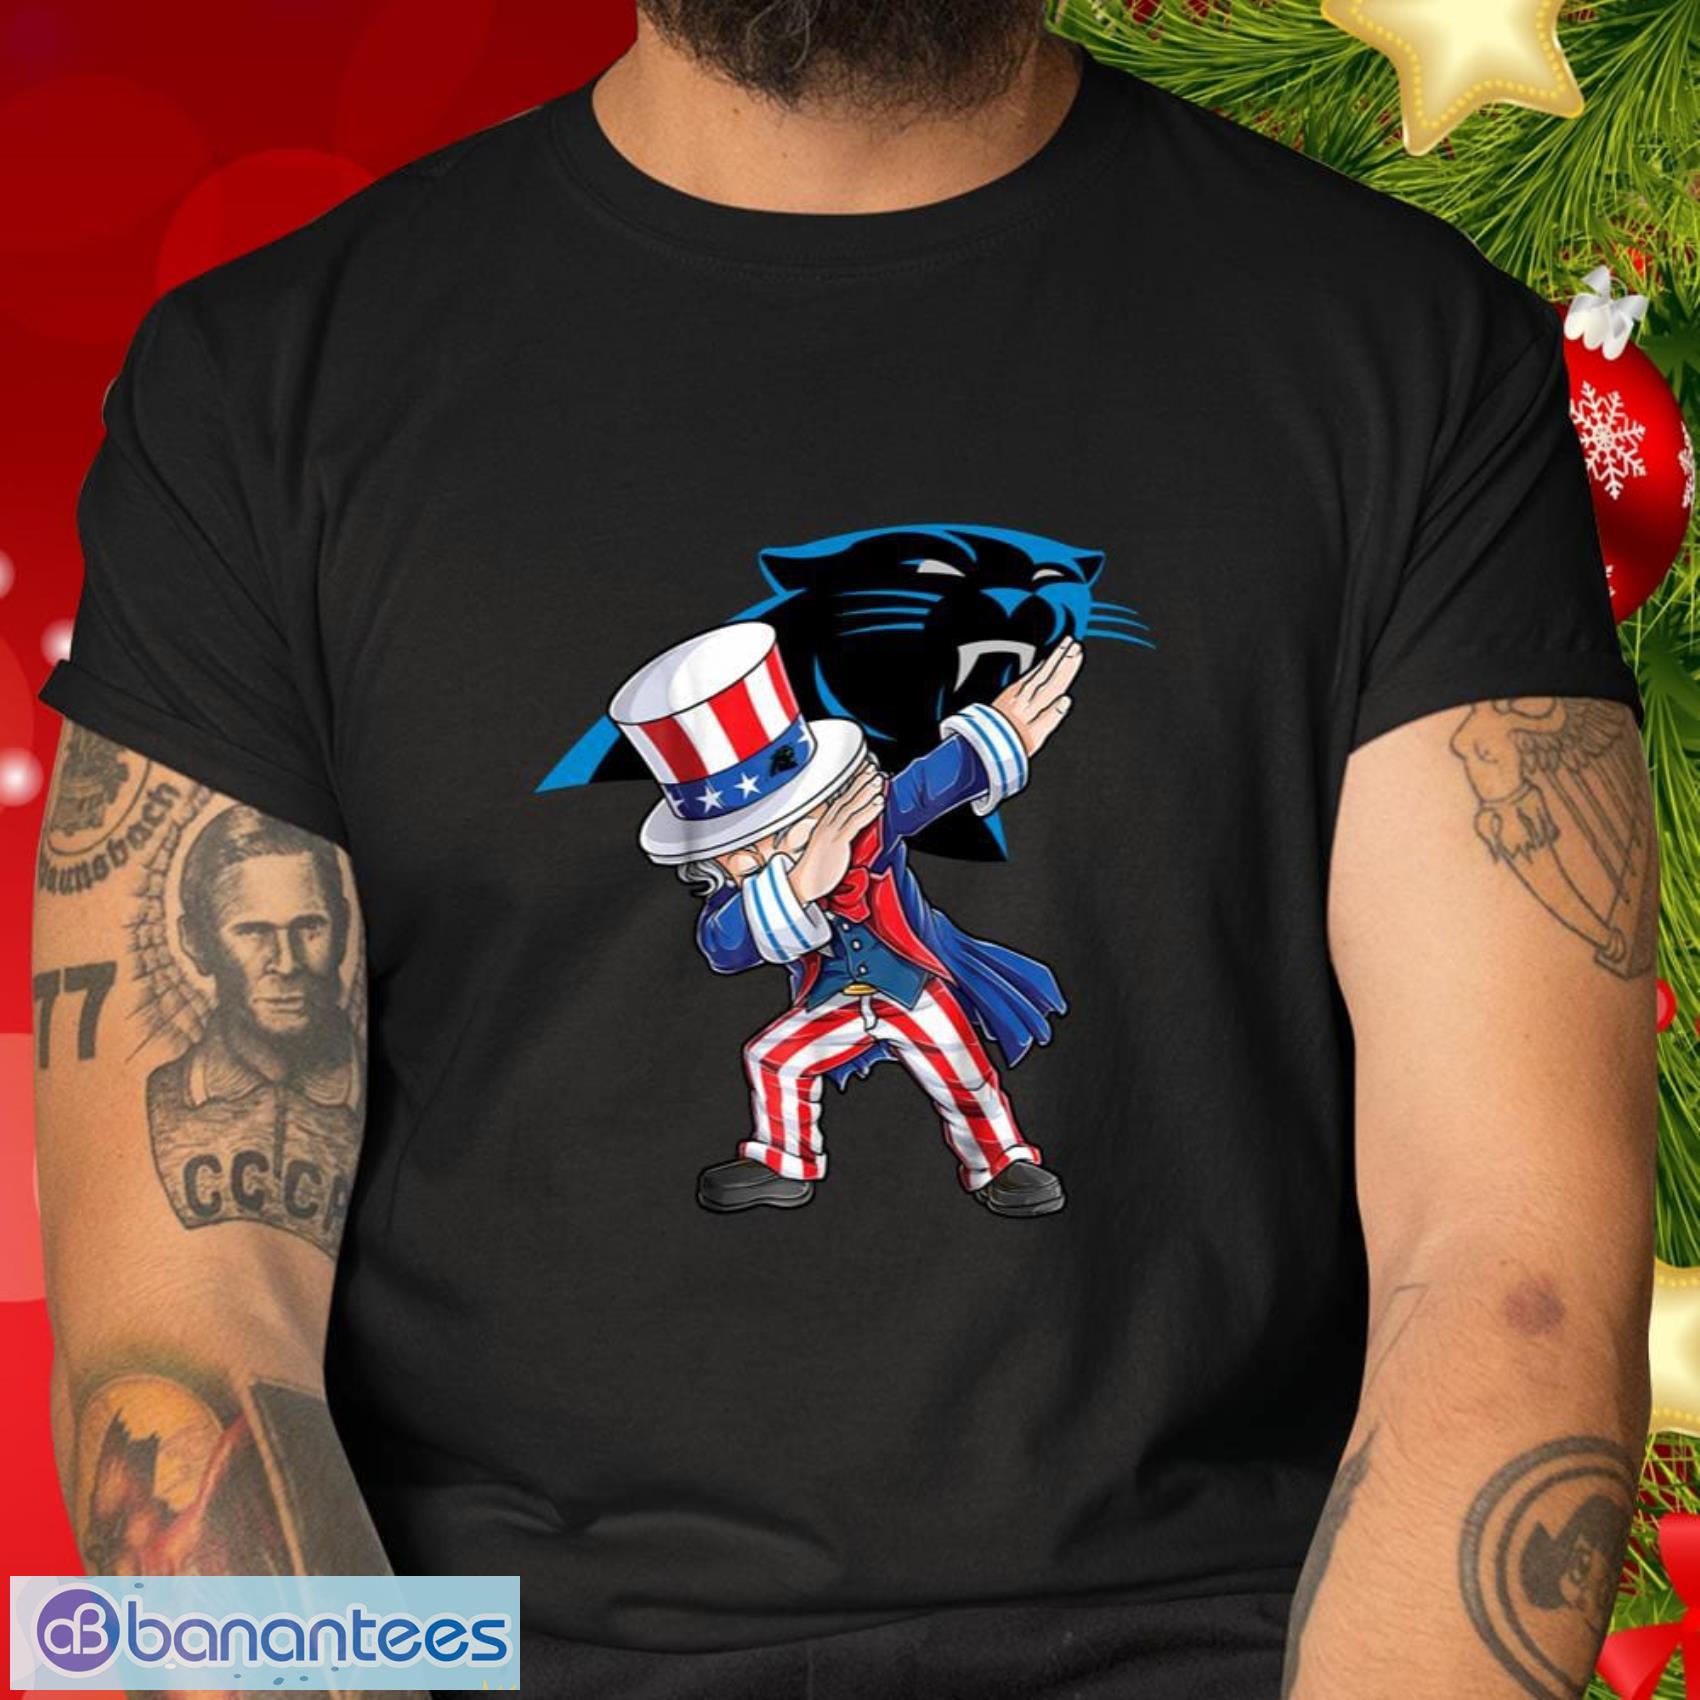 Carolina Panthers NFL Football Gift Fr Fans Dabbing Uncle Sam The Fourth of July T Shirt - Carolina Panthers NFL Football Dabbing Uncle Sam The Fourth of July T Shirt_2